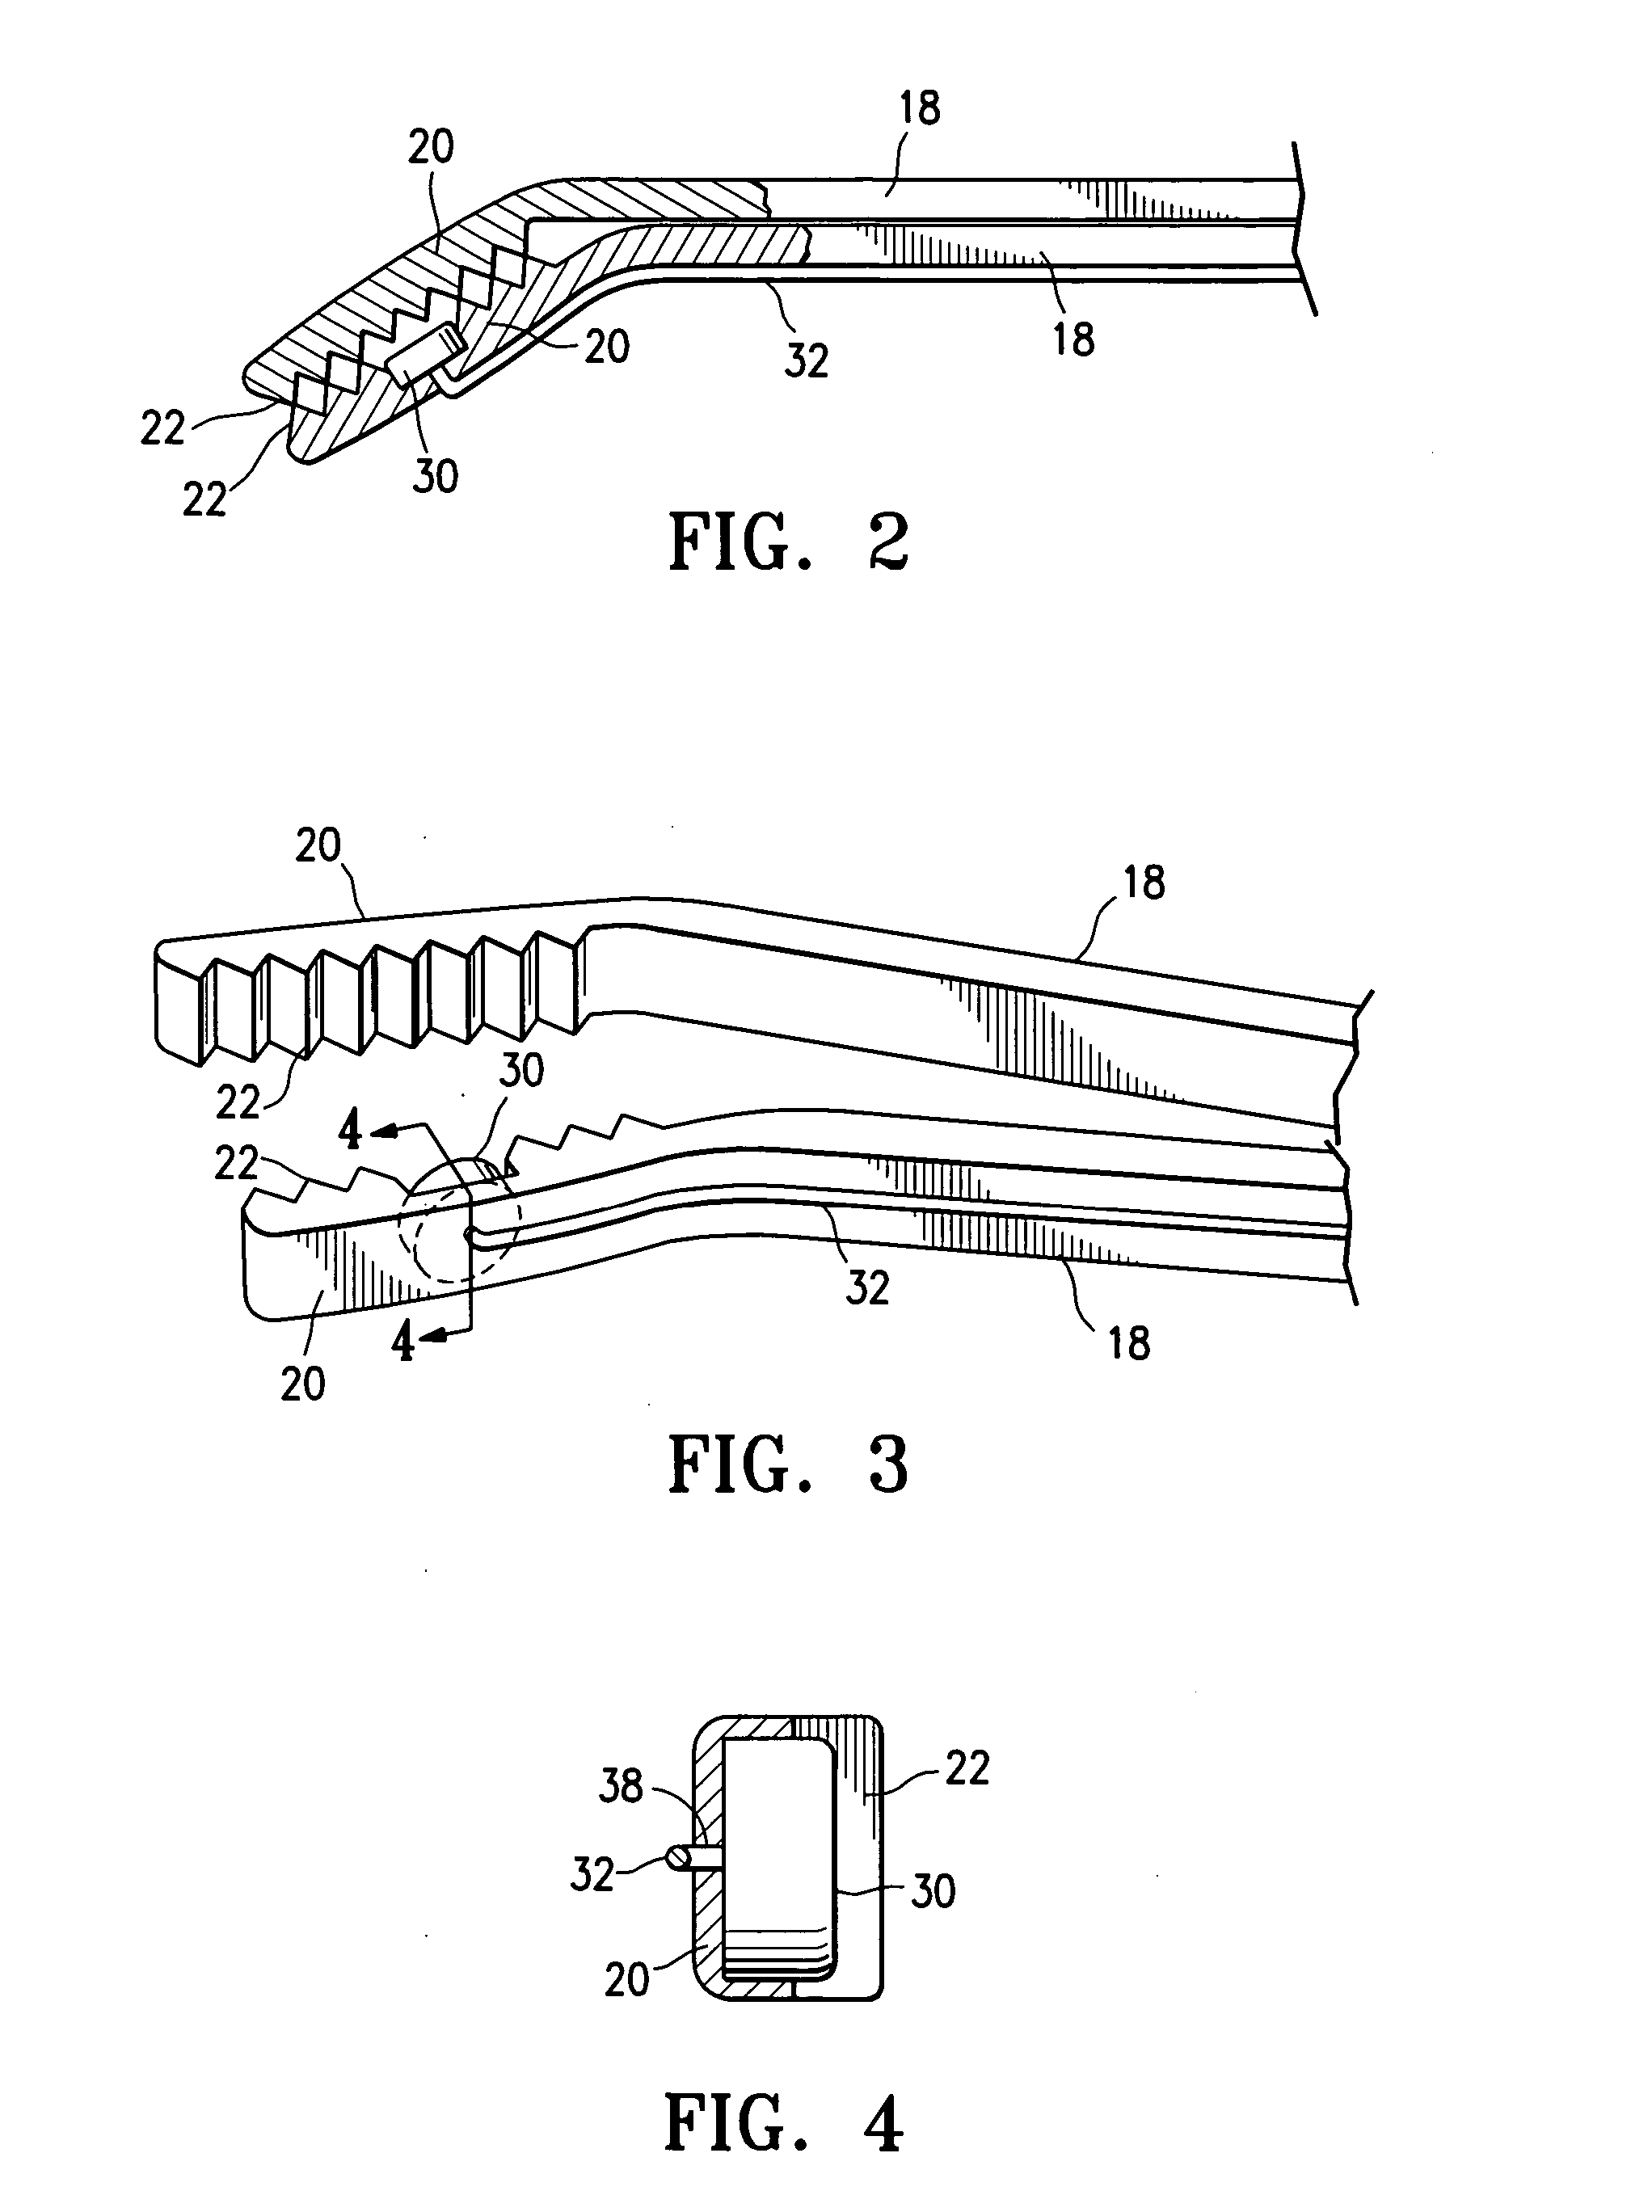 Method and device for treating adenomyosis and endometriosis